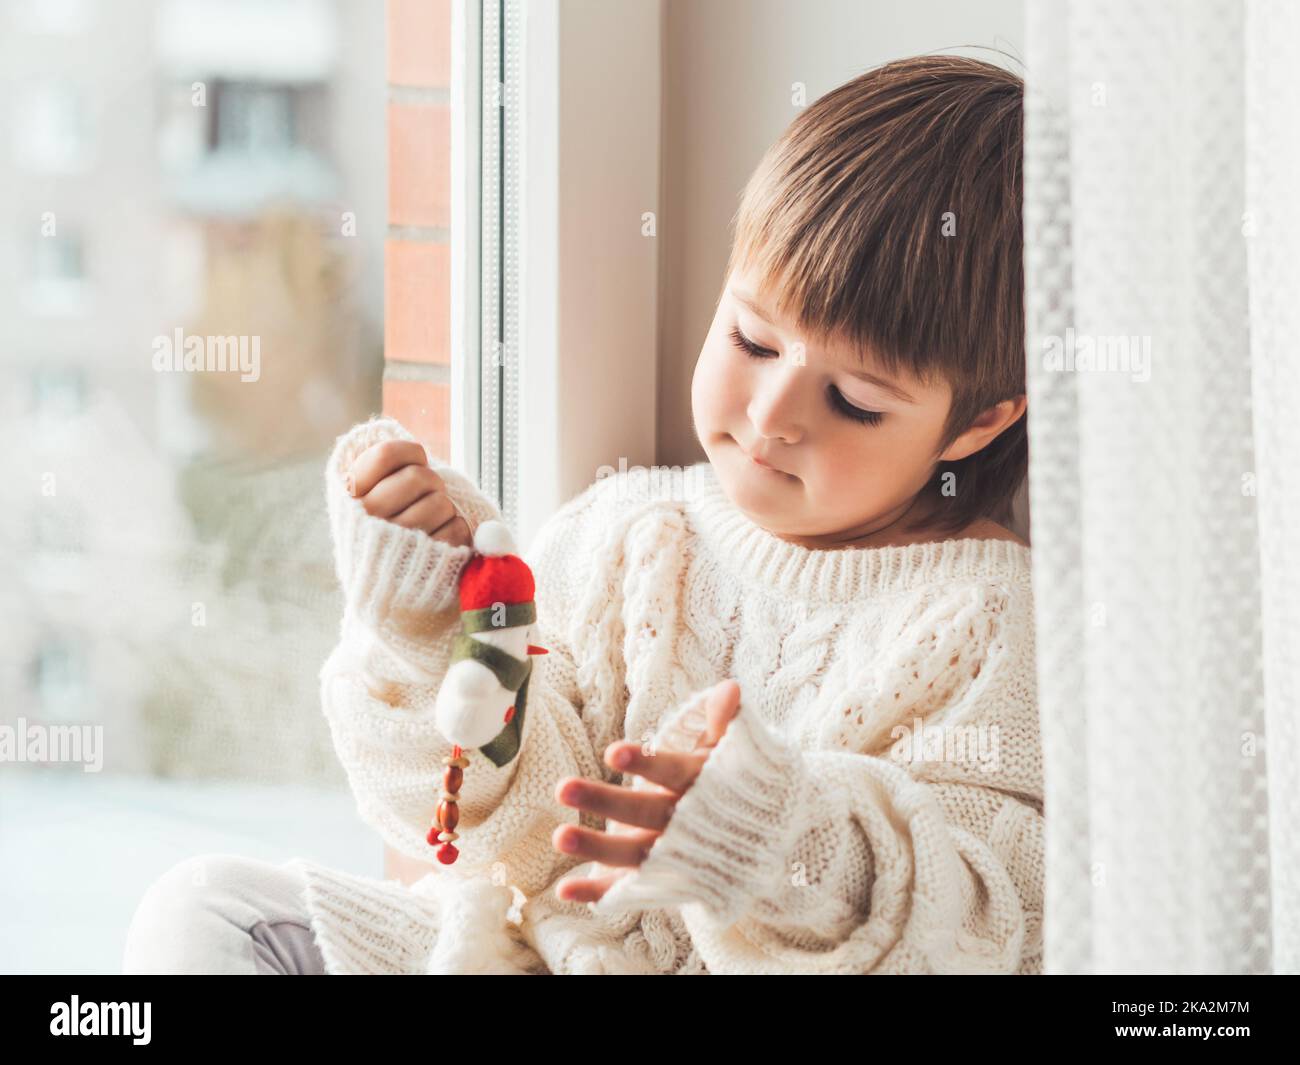 Kid with felt decorative snowman for Christmas tree. Boy in cable-knit oversized sweater. Cozy outfit for snuggle weather. Character with Santa hat. Stock Photo